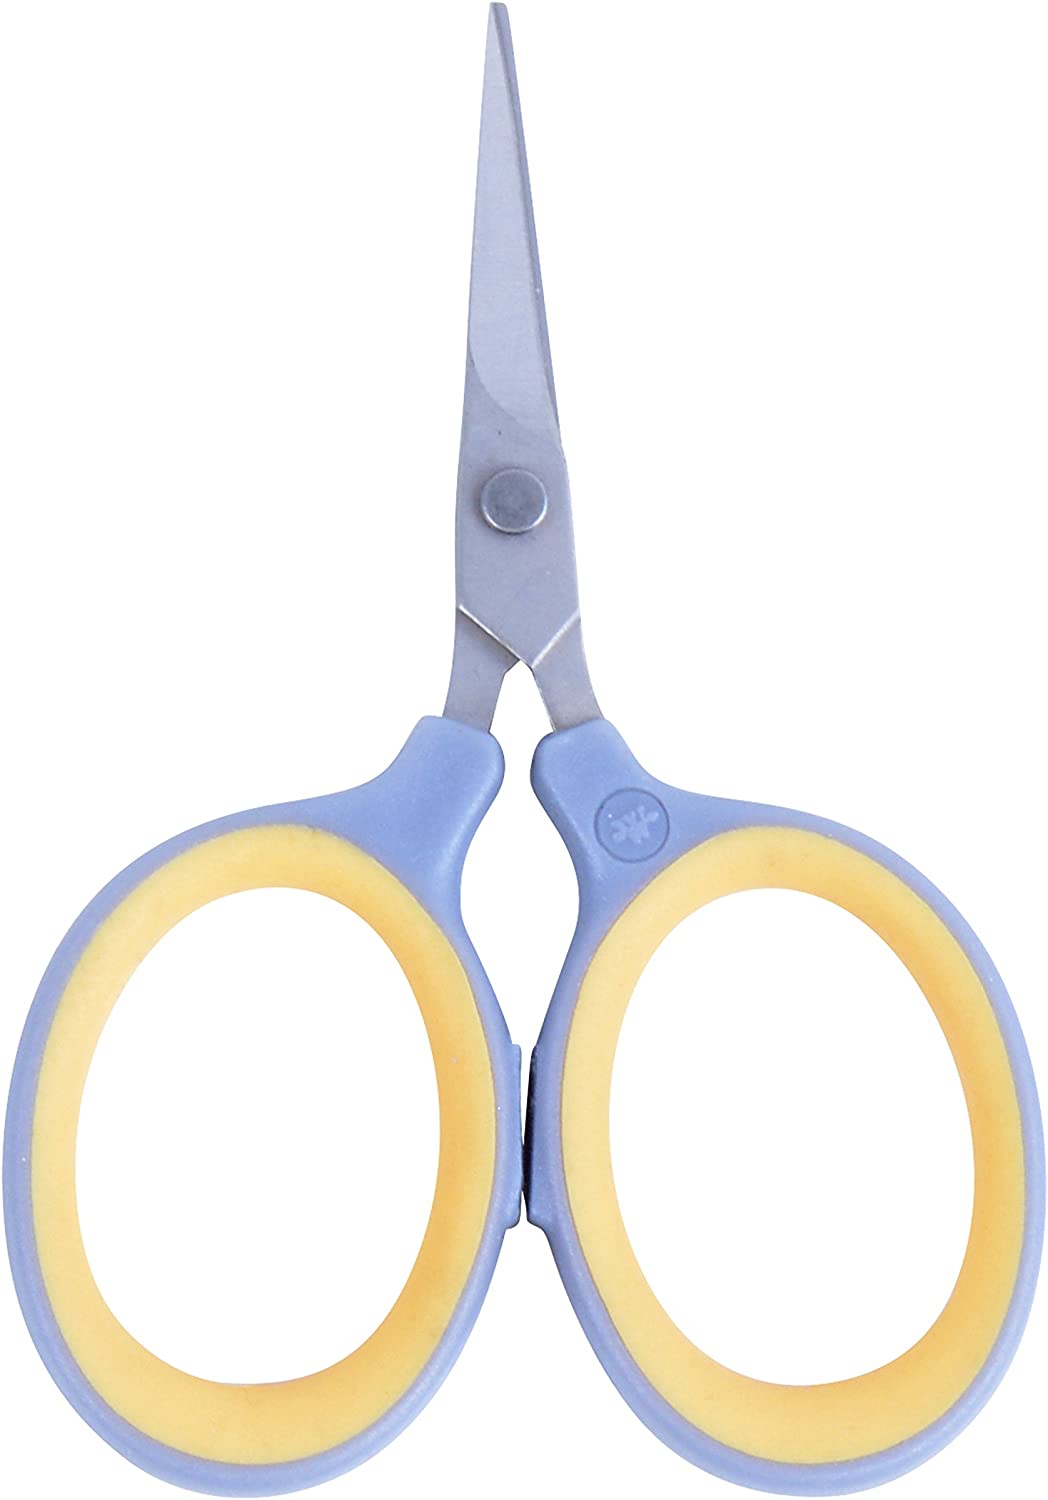 HALO FORGE Round Tip Sewing Scissors: Small Safety Sharp Tiny Fabric  Scissors, 4.75 Inches Silver Stainless Steel Shears for Cutting Yarn Thread